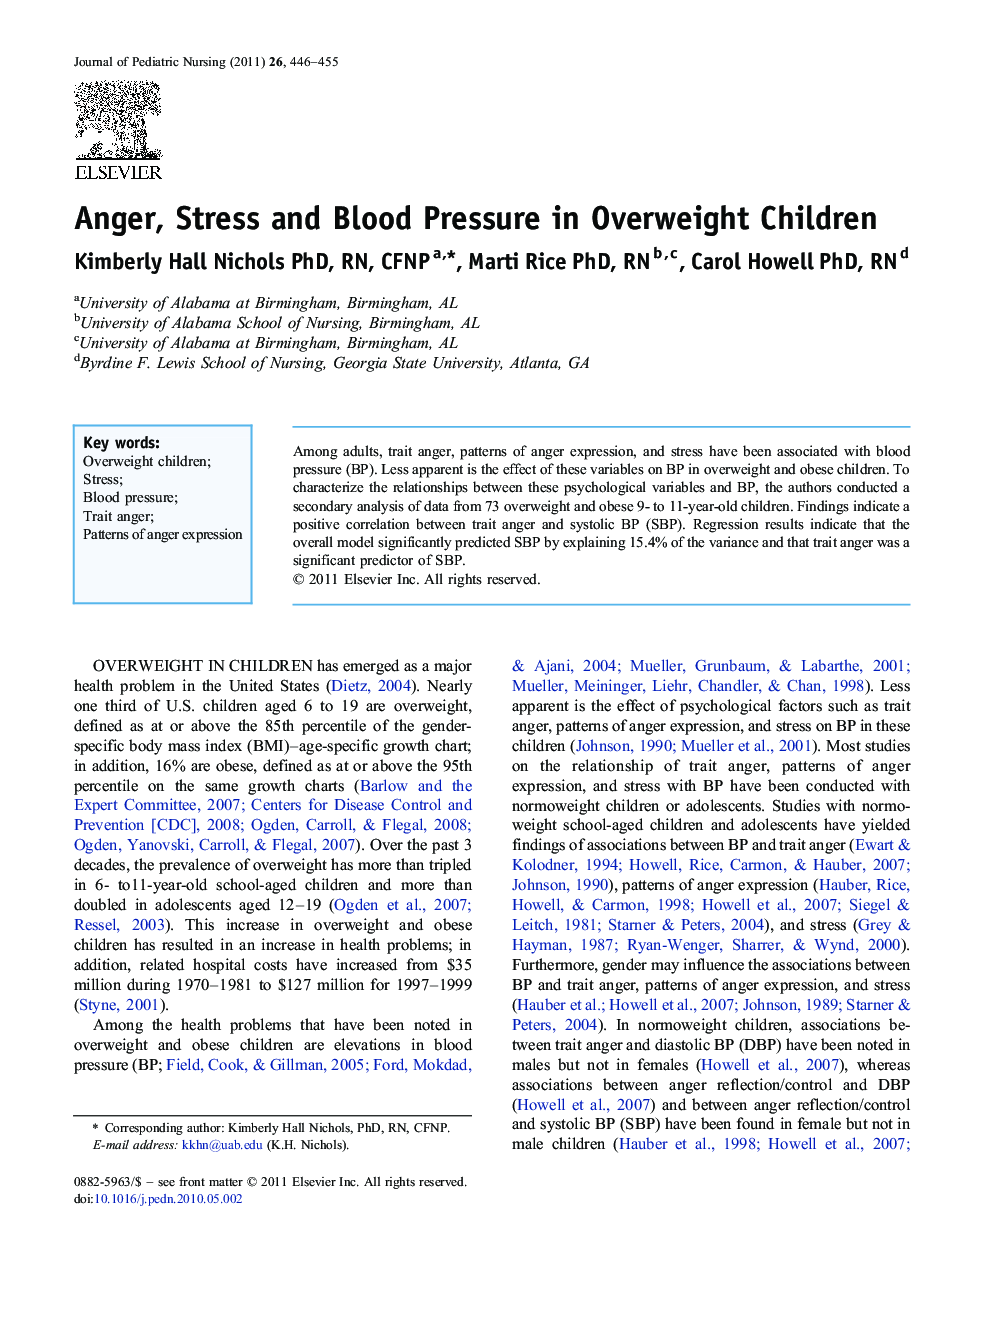 Anger, Stress and Blood Pressure in Overweight Children